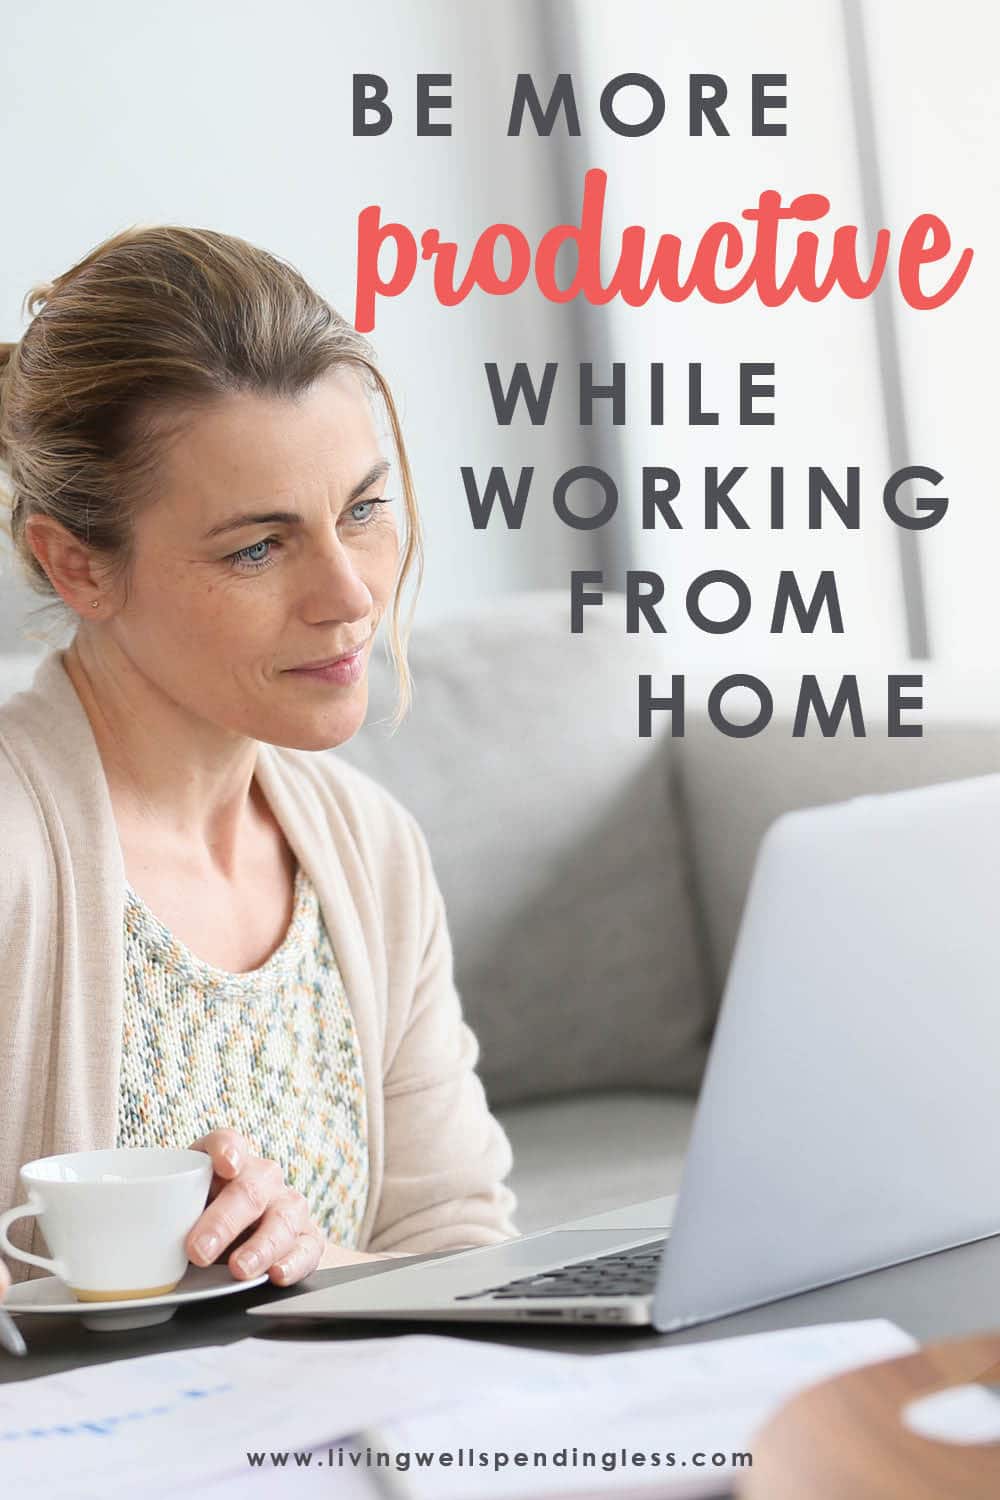 Working from home has its challenges no doubt, and even more so if it’s suddenly due to the COVID-19 pandemic. So how can you still be productive and get what you need done? Don’t miss these 7 powerful strategies to help you successfully navigate working from home. #workingfromhome #tipsforworkingfromhome